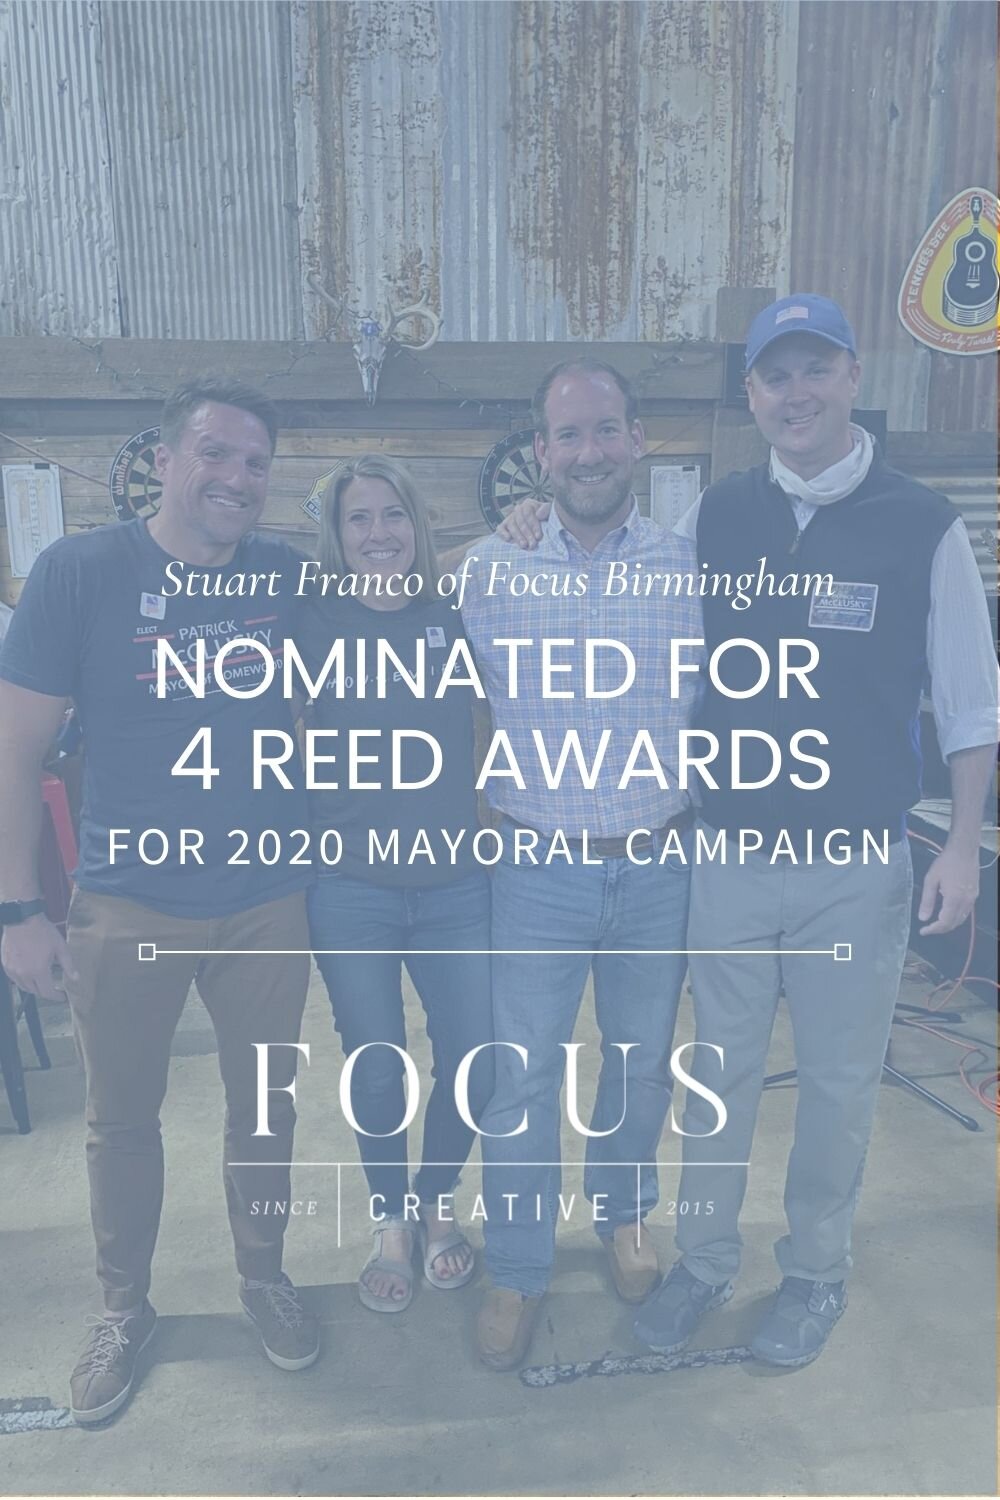 Focus Creative nominated for Four Reed Awards by Campaigns &amp; Elections